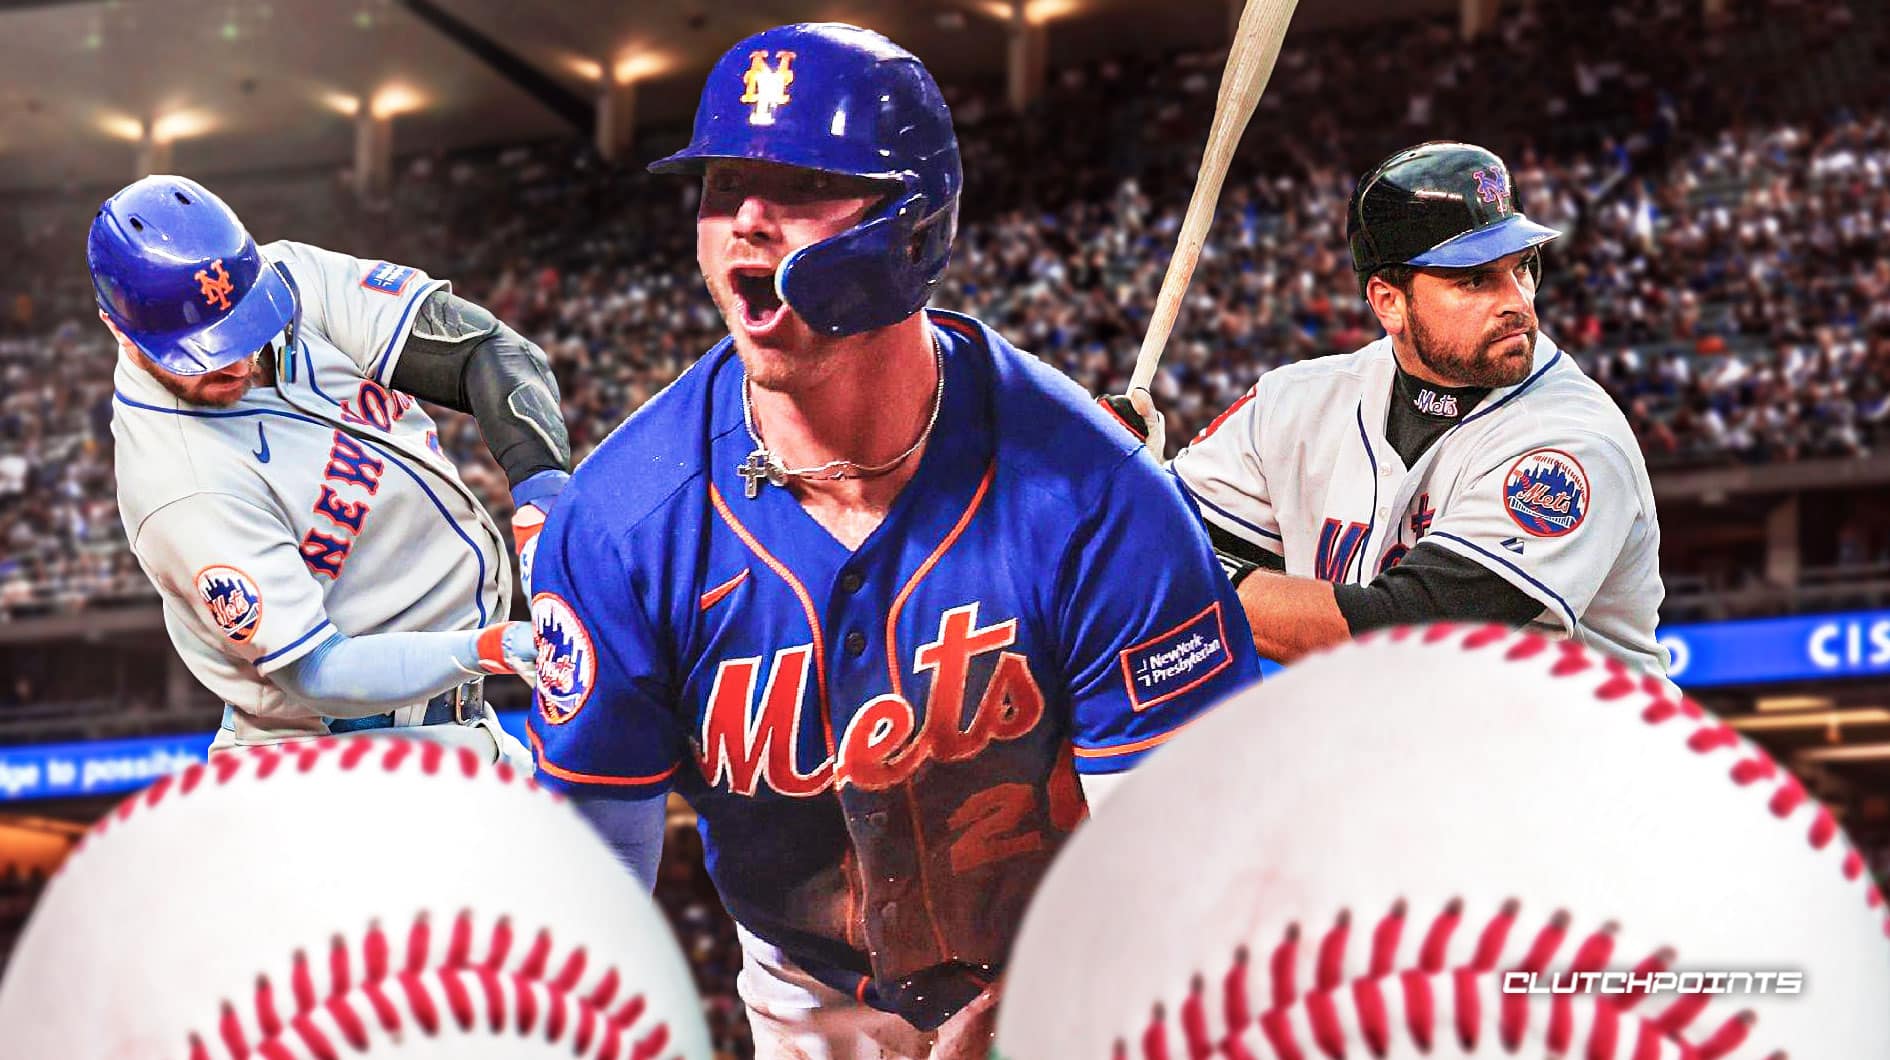 Pete Alonso reaches impressive Mets HR franchise record that Mike